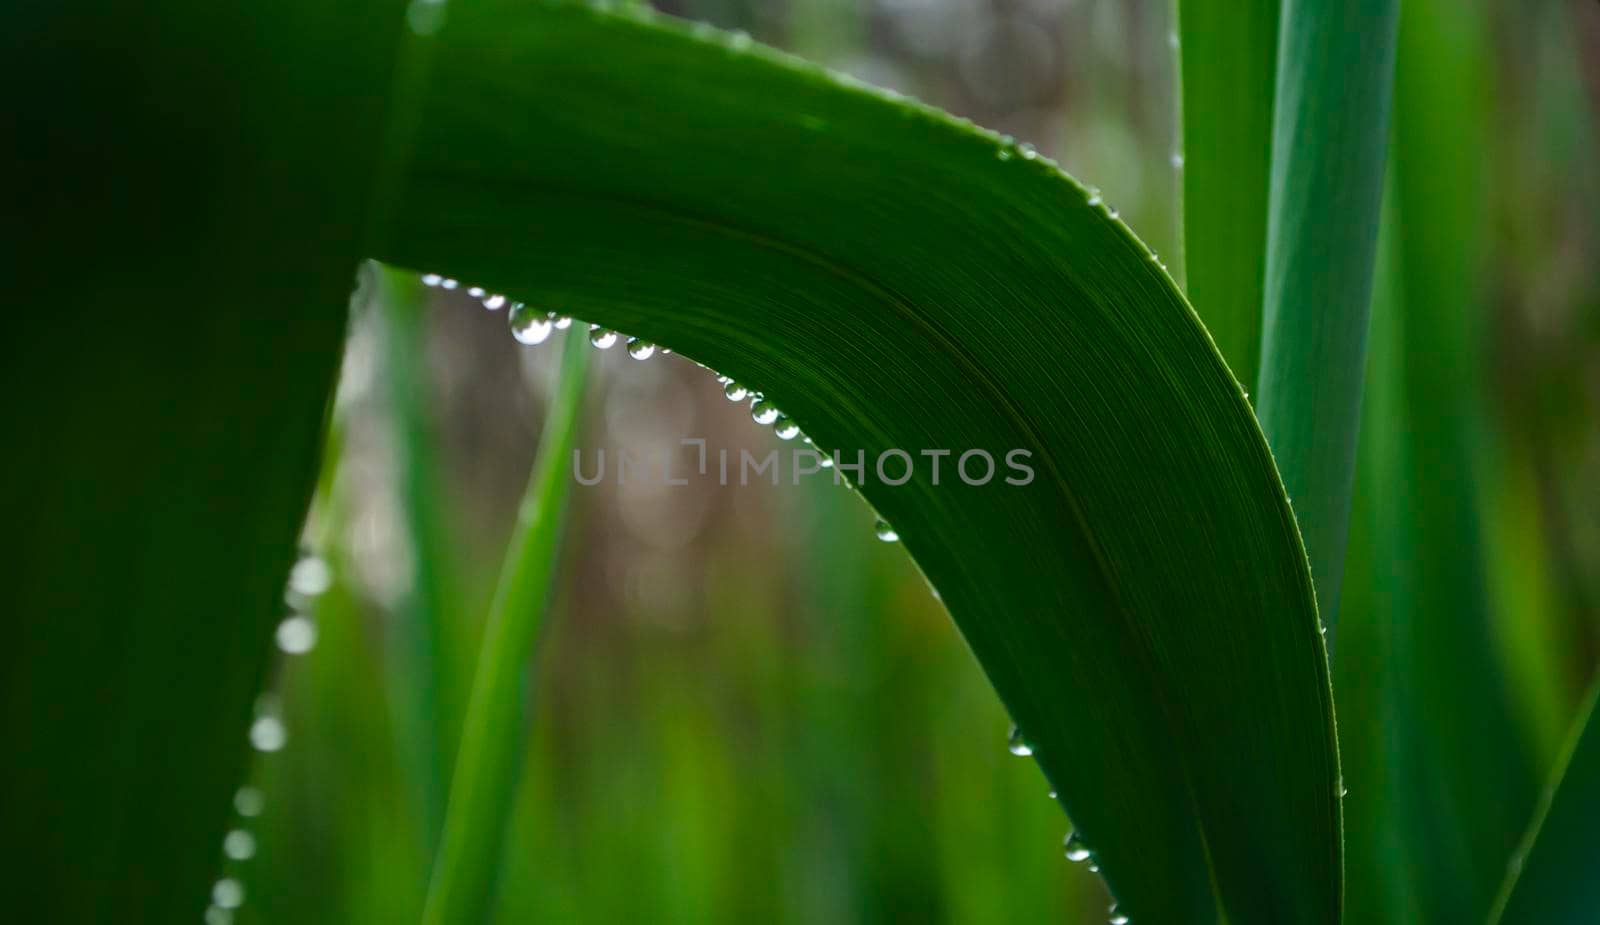 Reed leaves in raindrops. The smell of freshness and greenery. by mtx